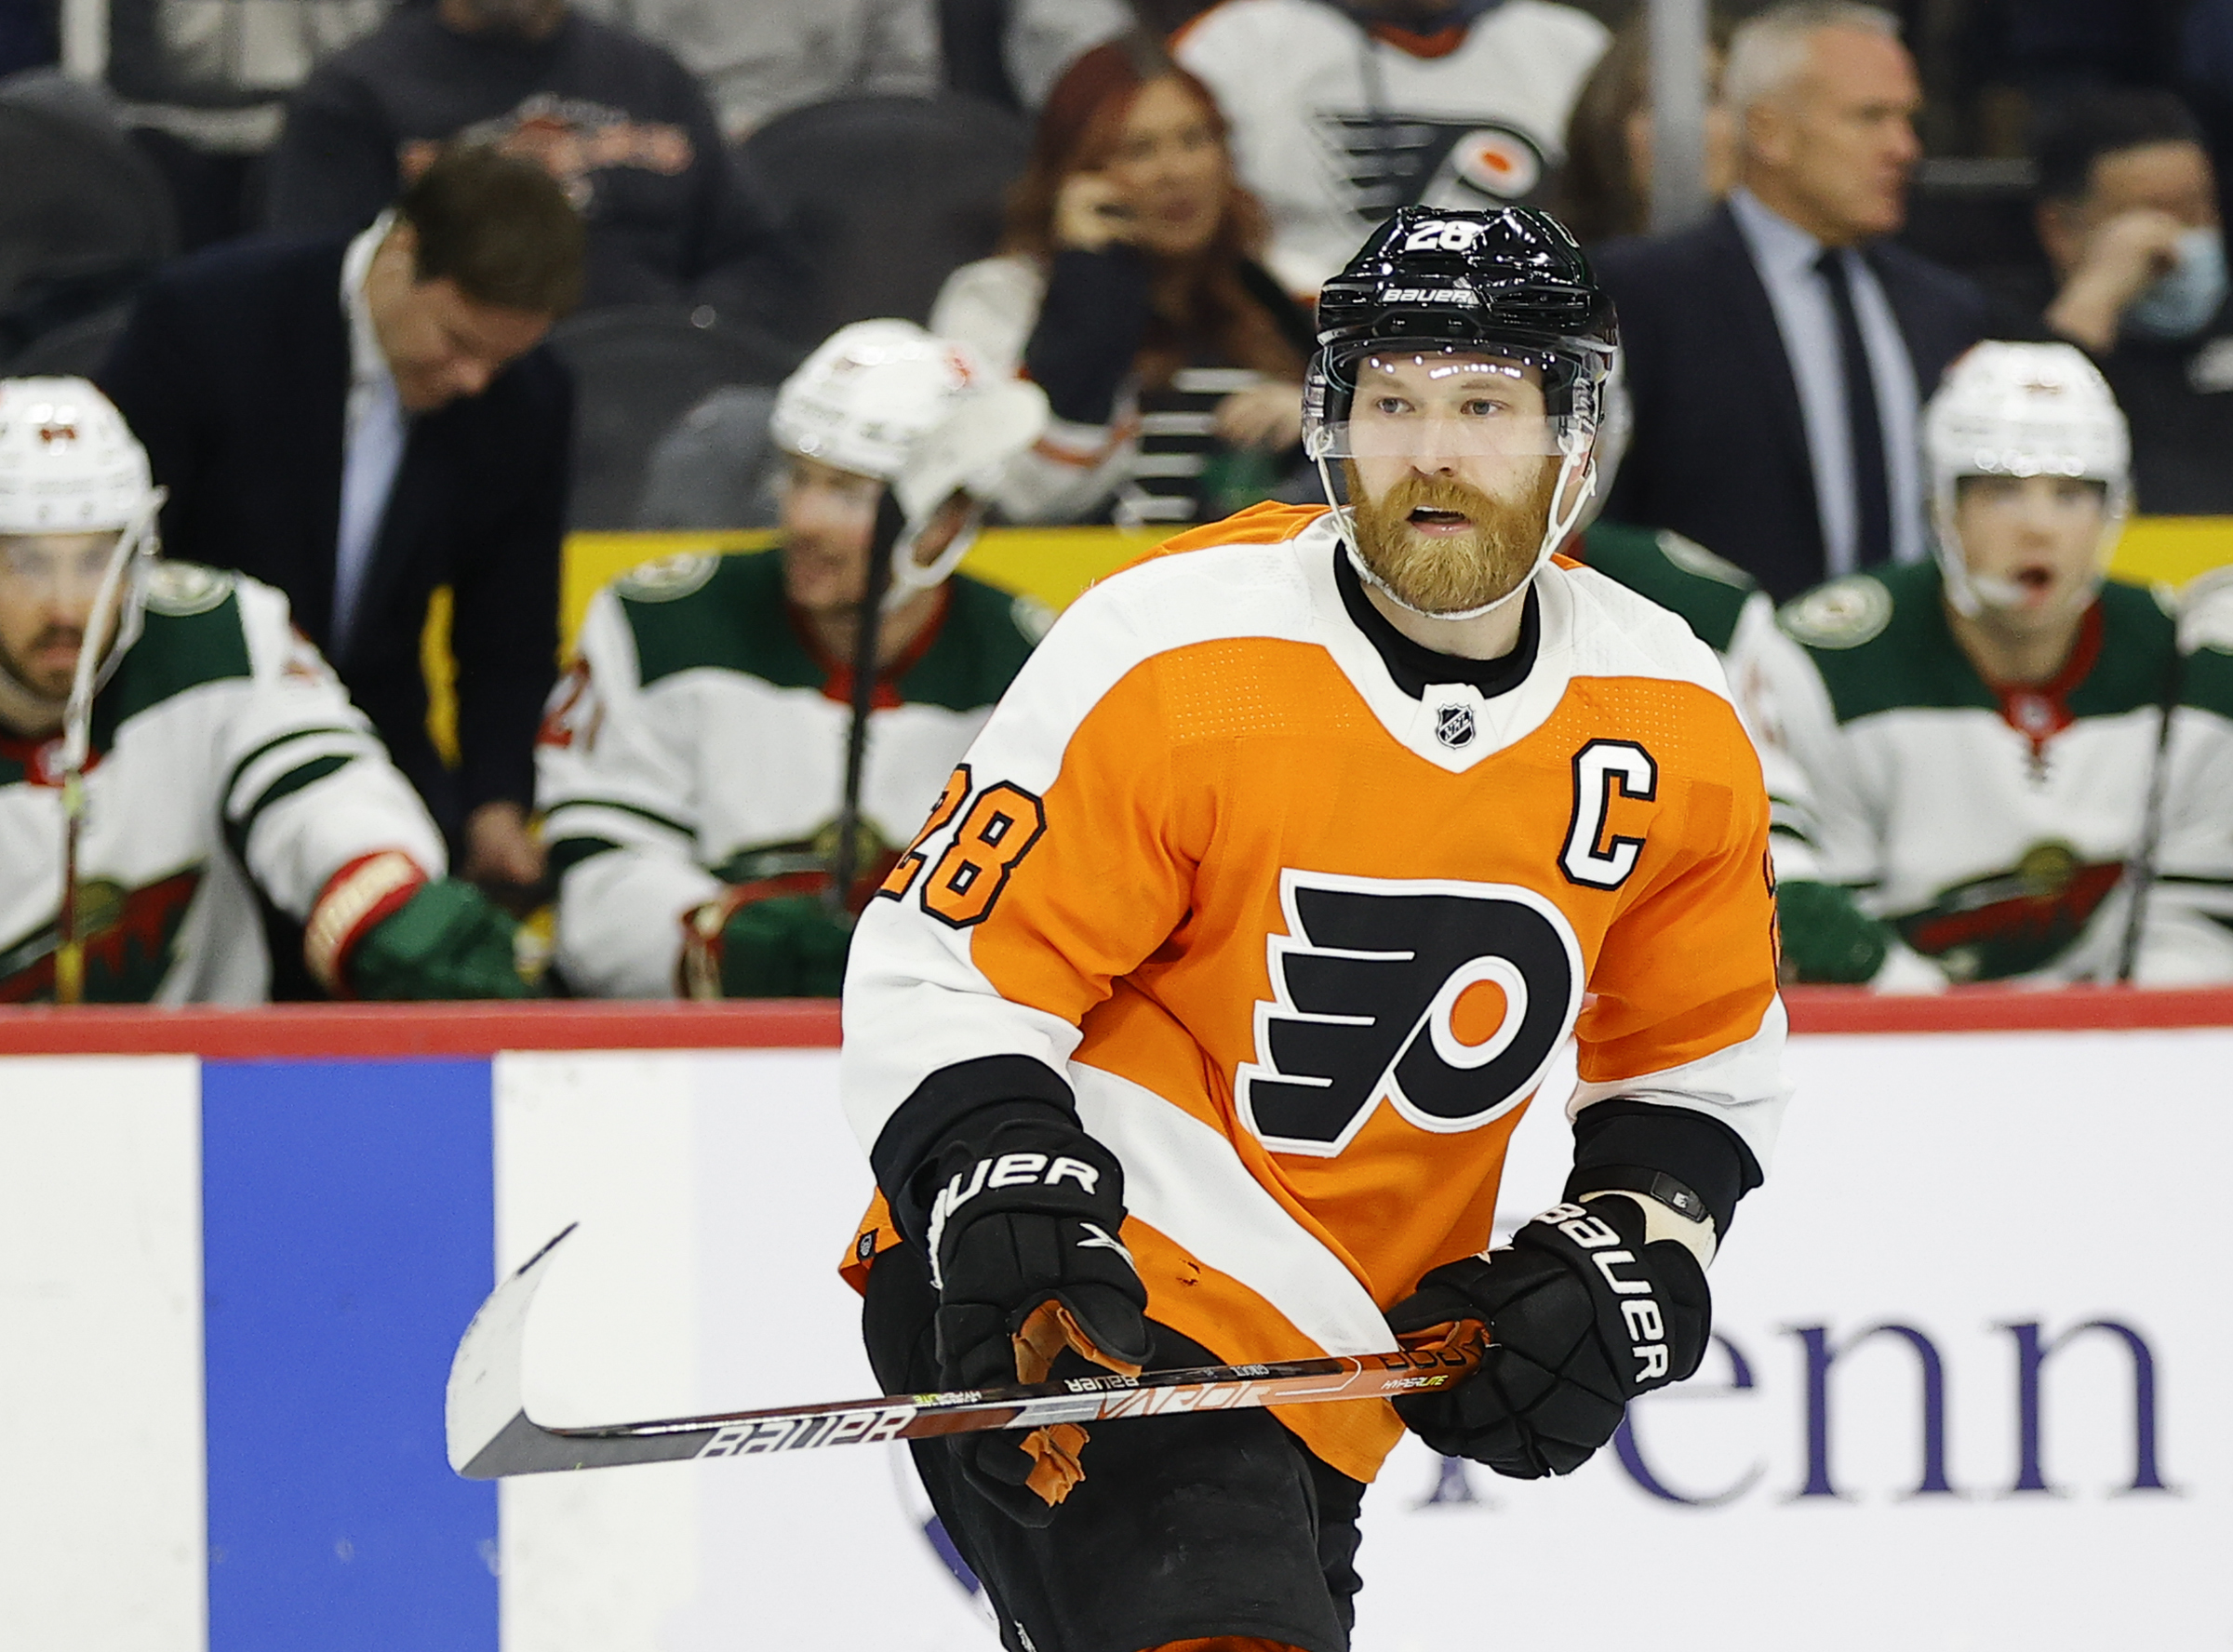 Where Would Claude Giroux Fit With The St. Louis Blues